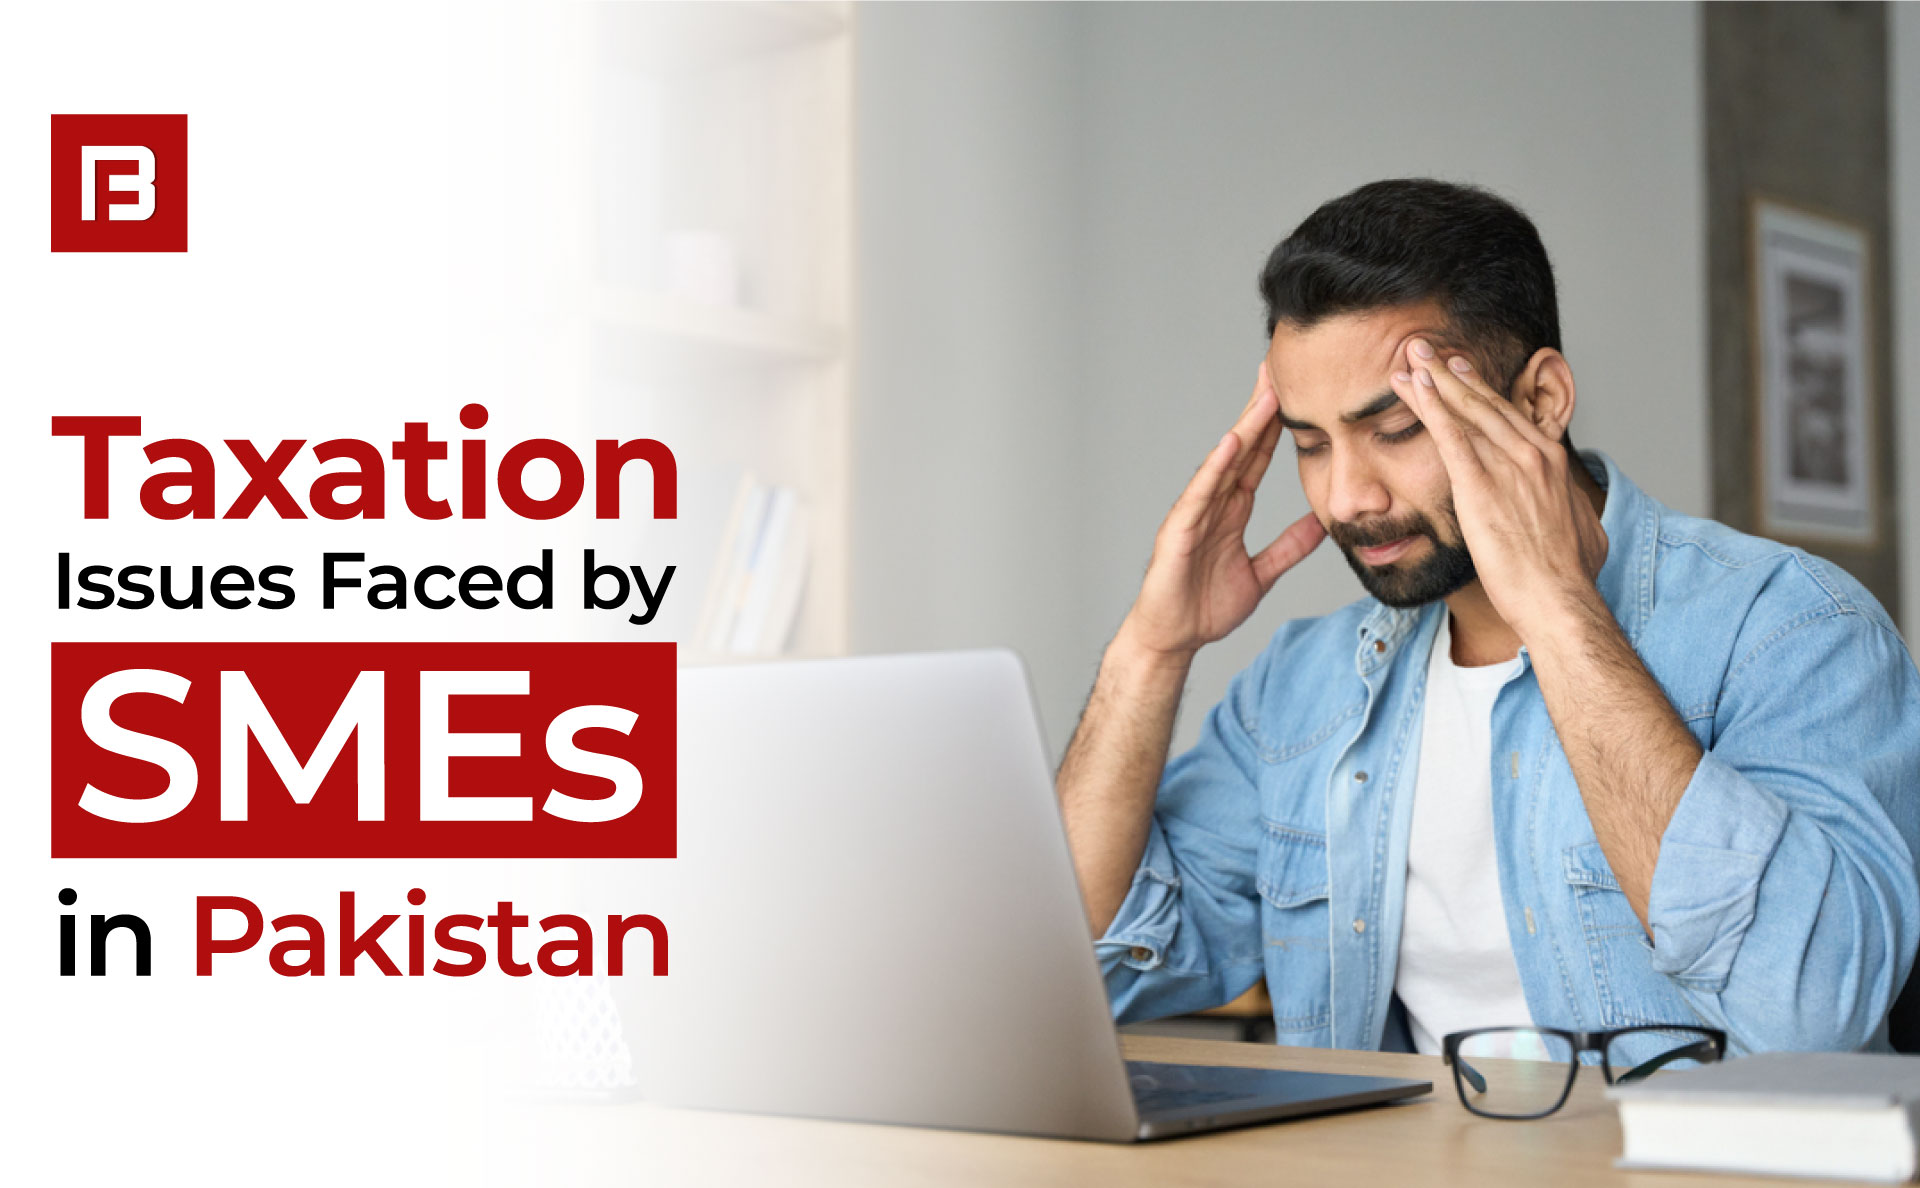 TAXATION ISSUES FACED BY SMEs IN PAKISTAN